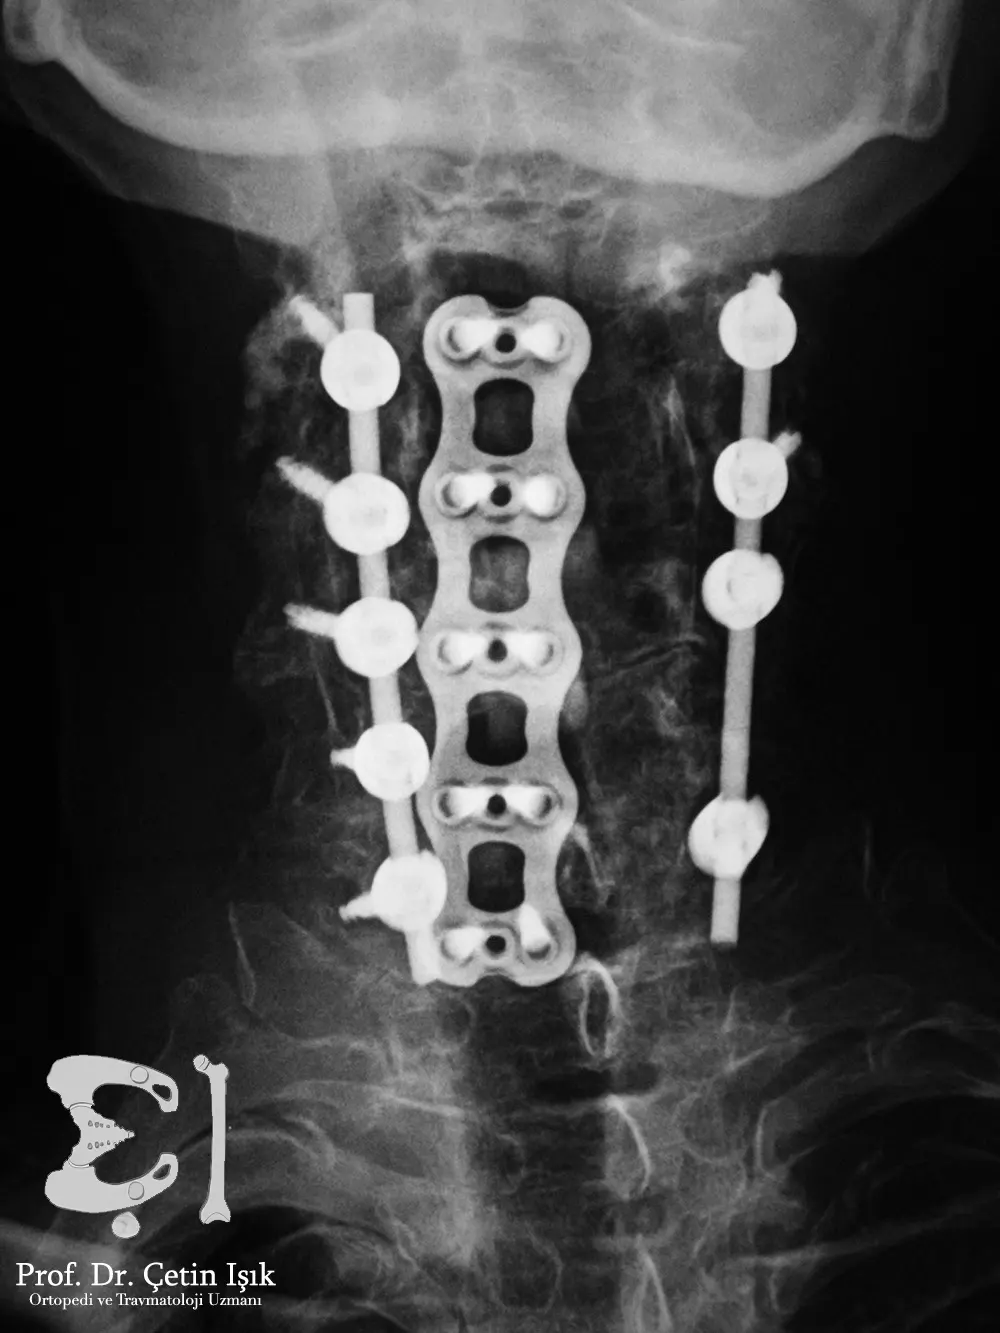 An image showing the method of stabilizing the vertebrae using screws, slides or metal plates